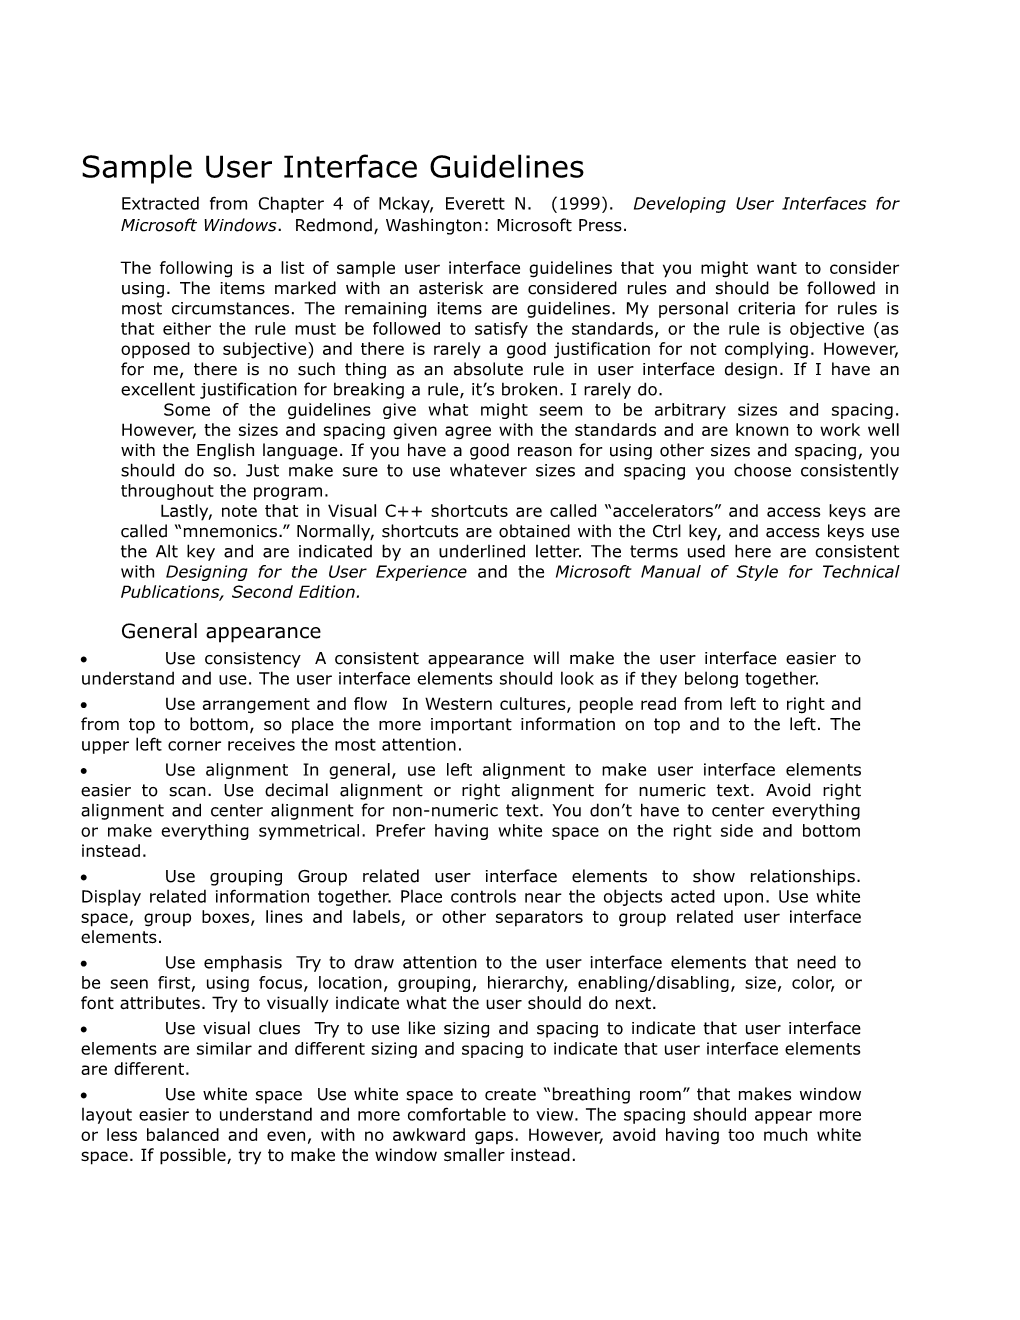 Sample User Interface Guidelines